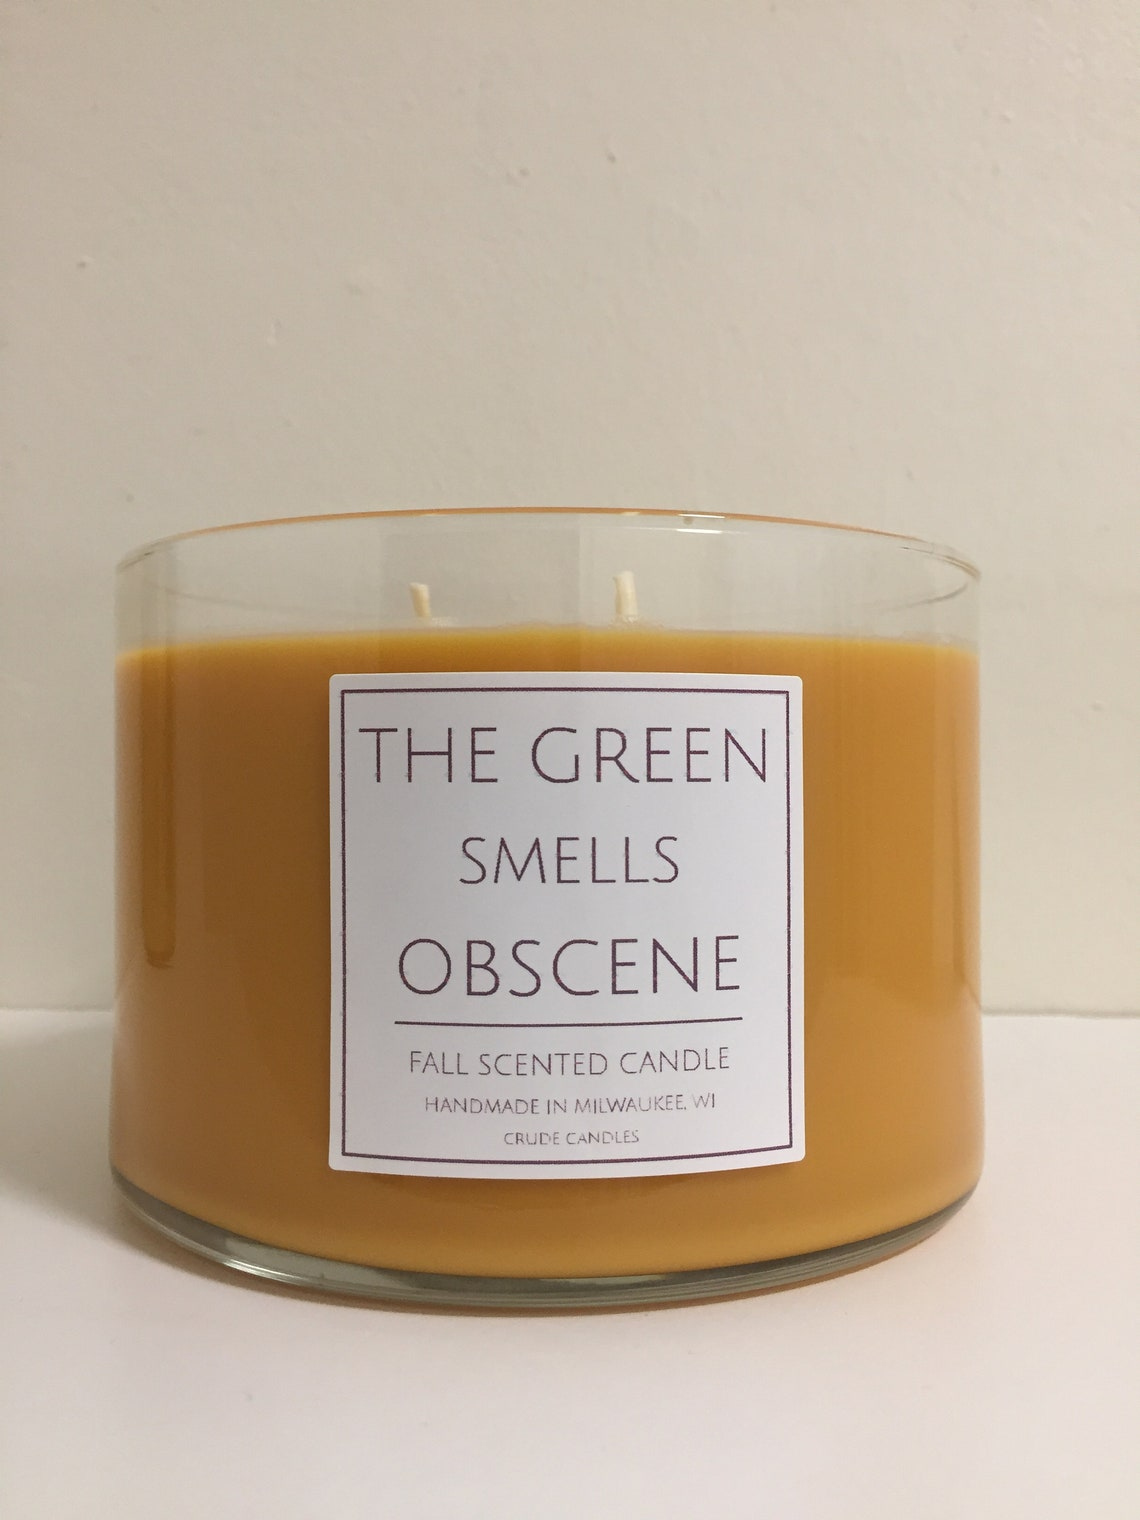 3 Wick The Green Smells Obscene Funny Clever Candle Labels Etsy